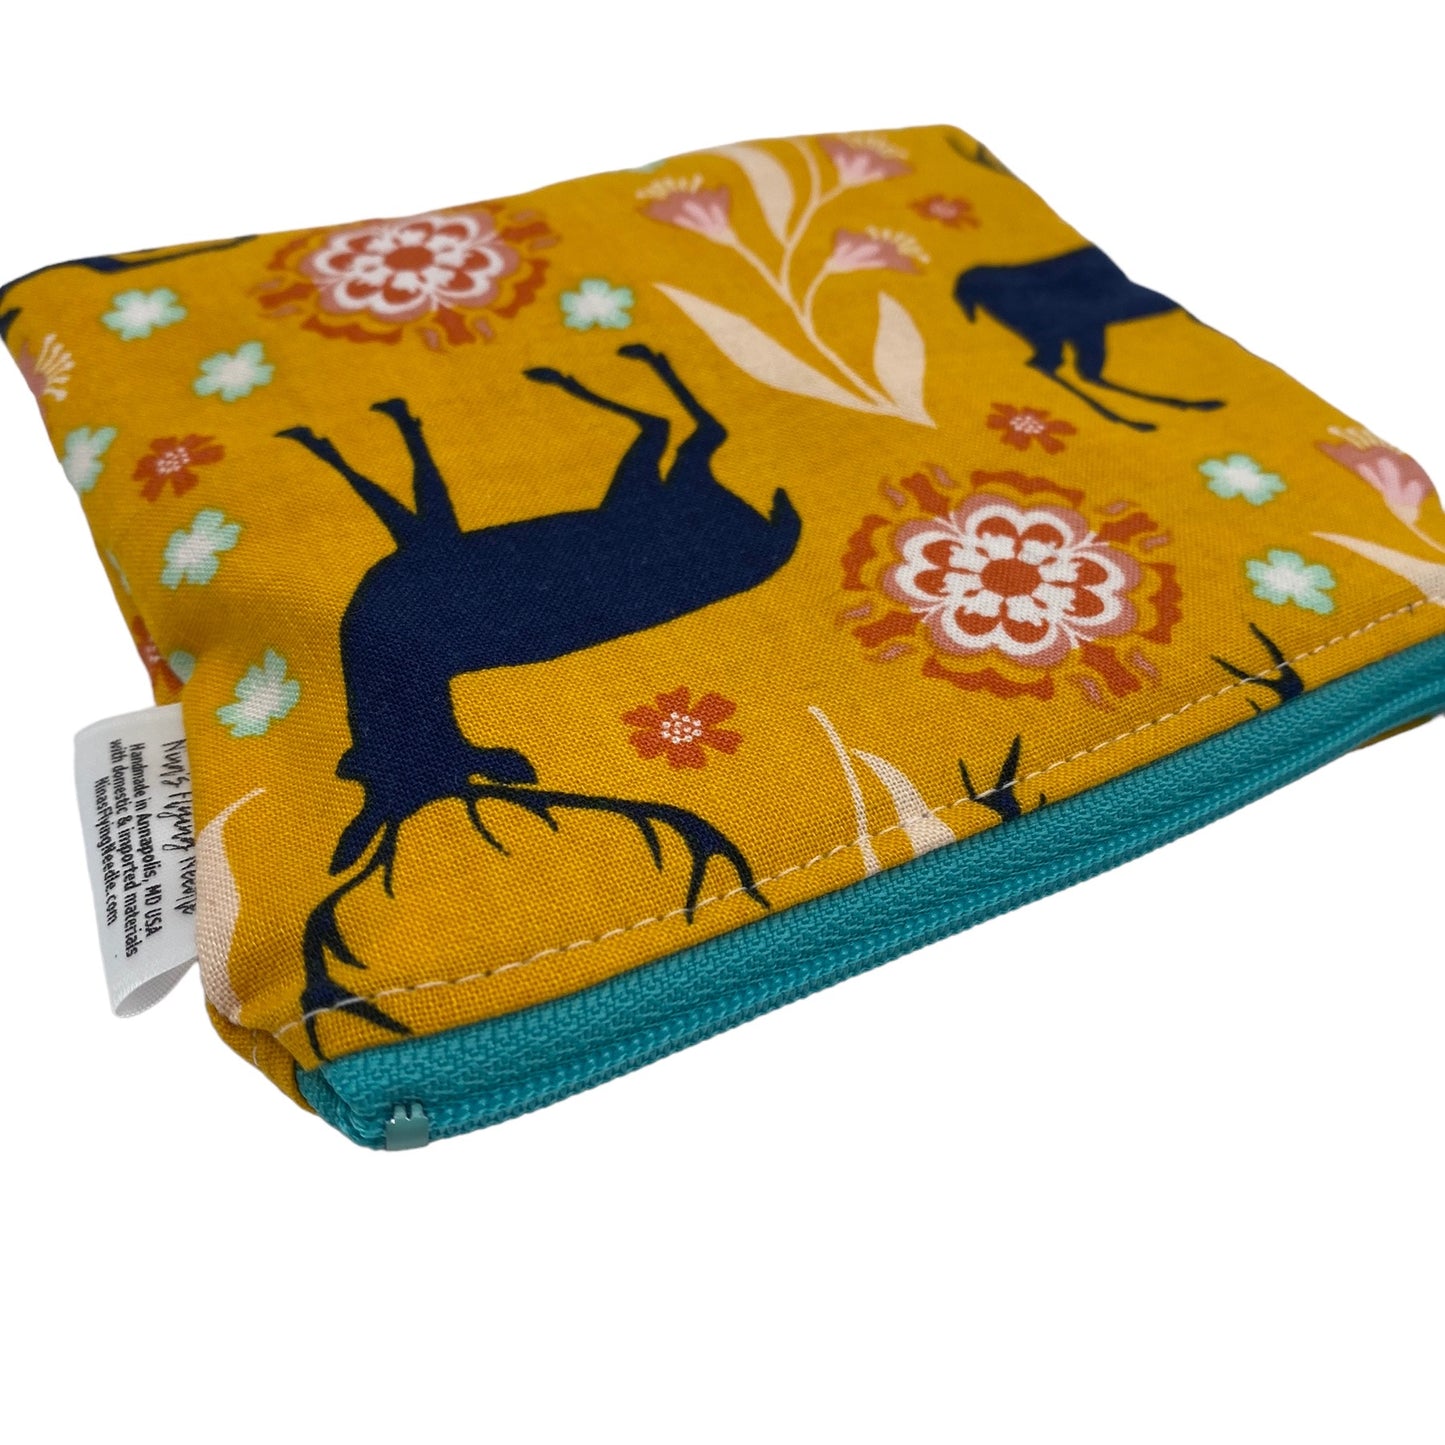 Toddler Sized Reusable Zippered Bag Deer and Floral